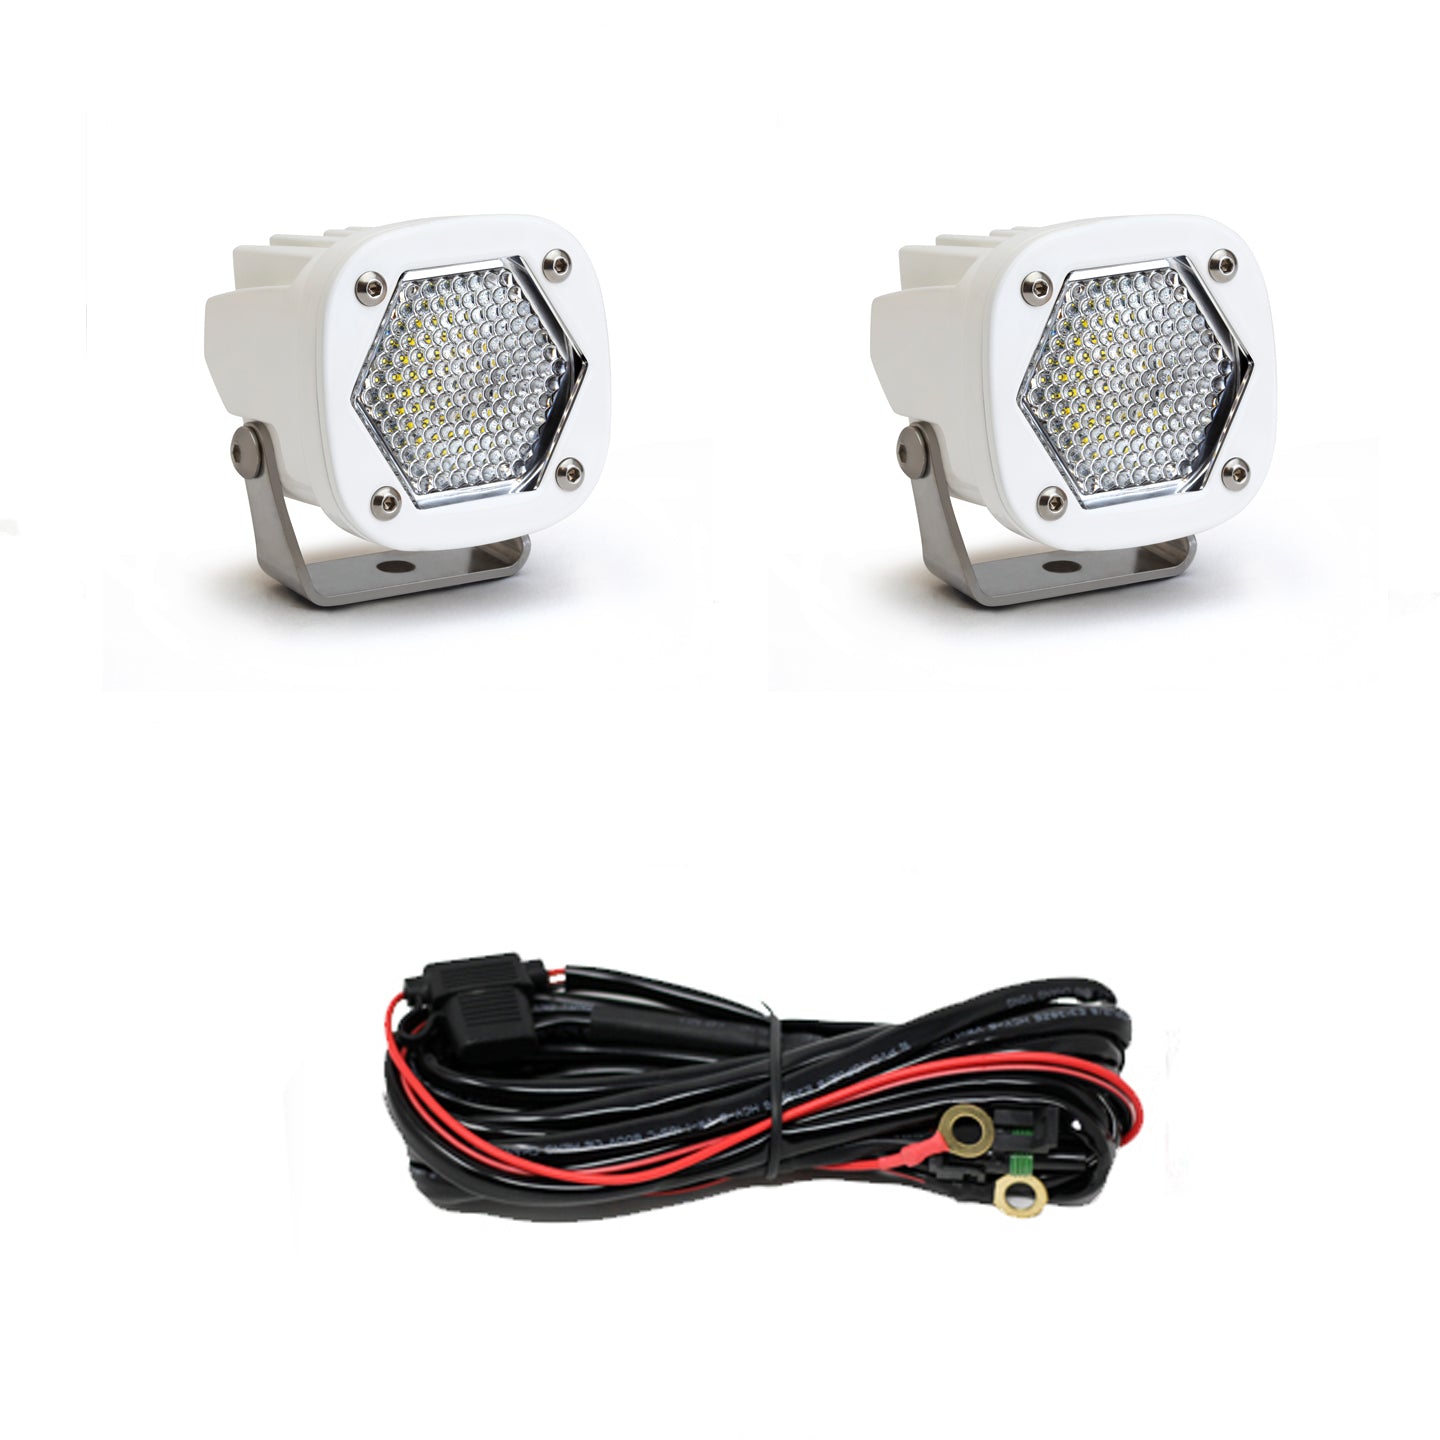 Baja Designs S1 LED Lights (WHITE) (Sold in Pairs)